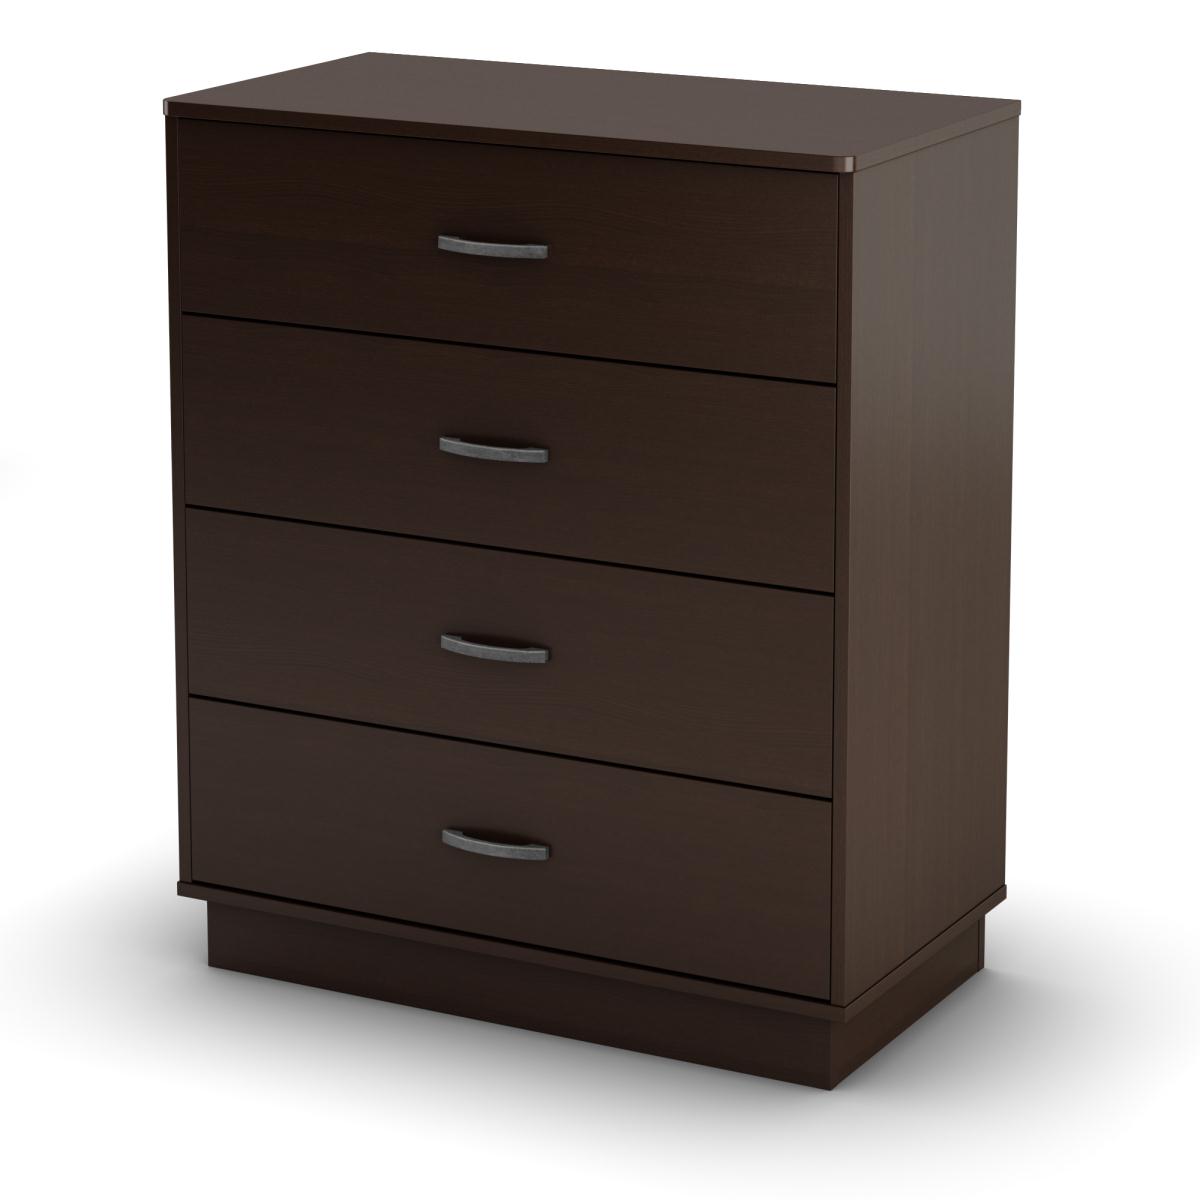 South Shore Logik 4 Drawer Chest - Chocolate